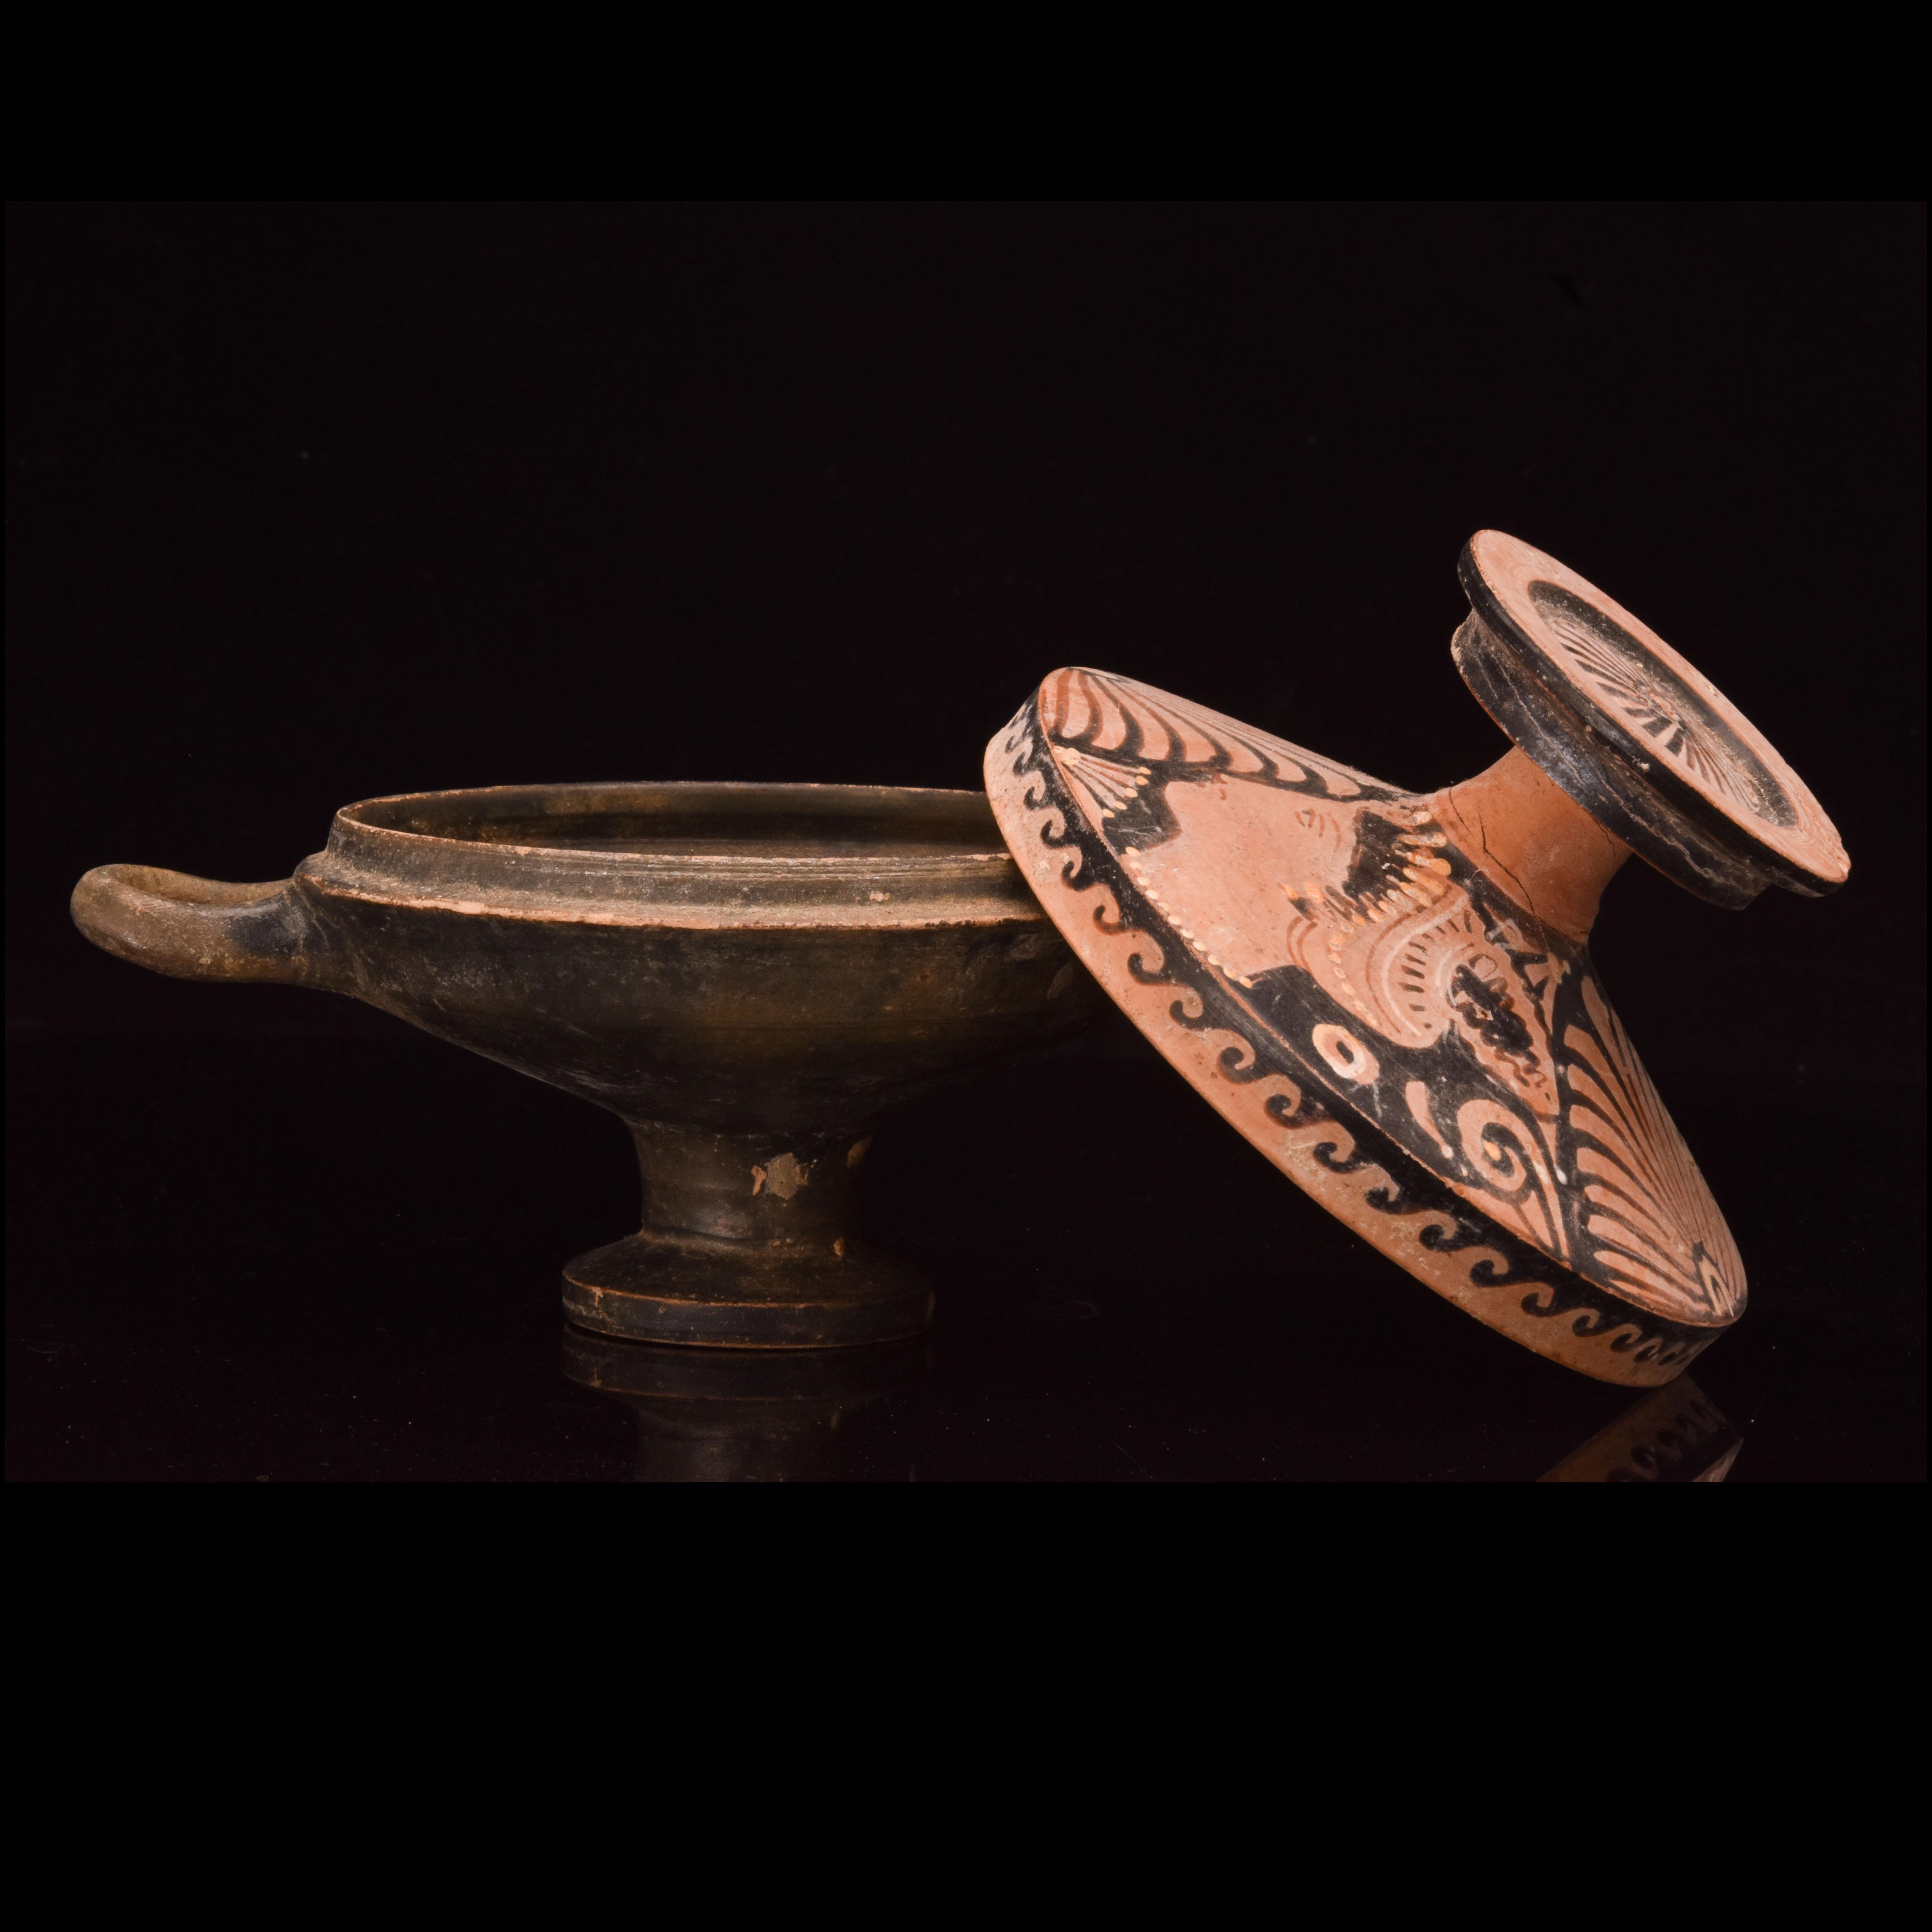 An Apulian lekanis comprised of two distinct components. The lower portion features a footed bowl adorned with a sleek black glaze, providing an elegant foundation for the vessel. Two opposing horizontal handles, meticulously crafted, facilitate